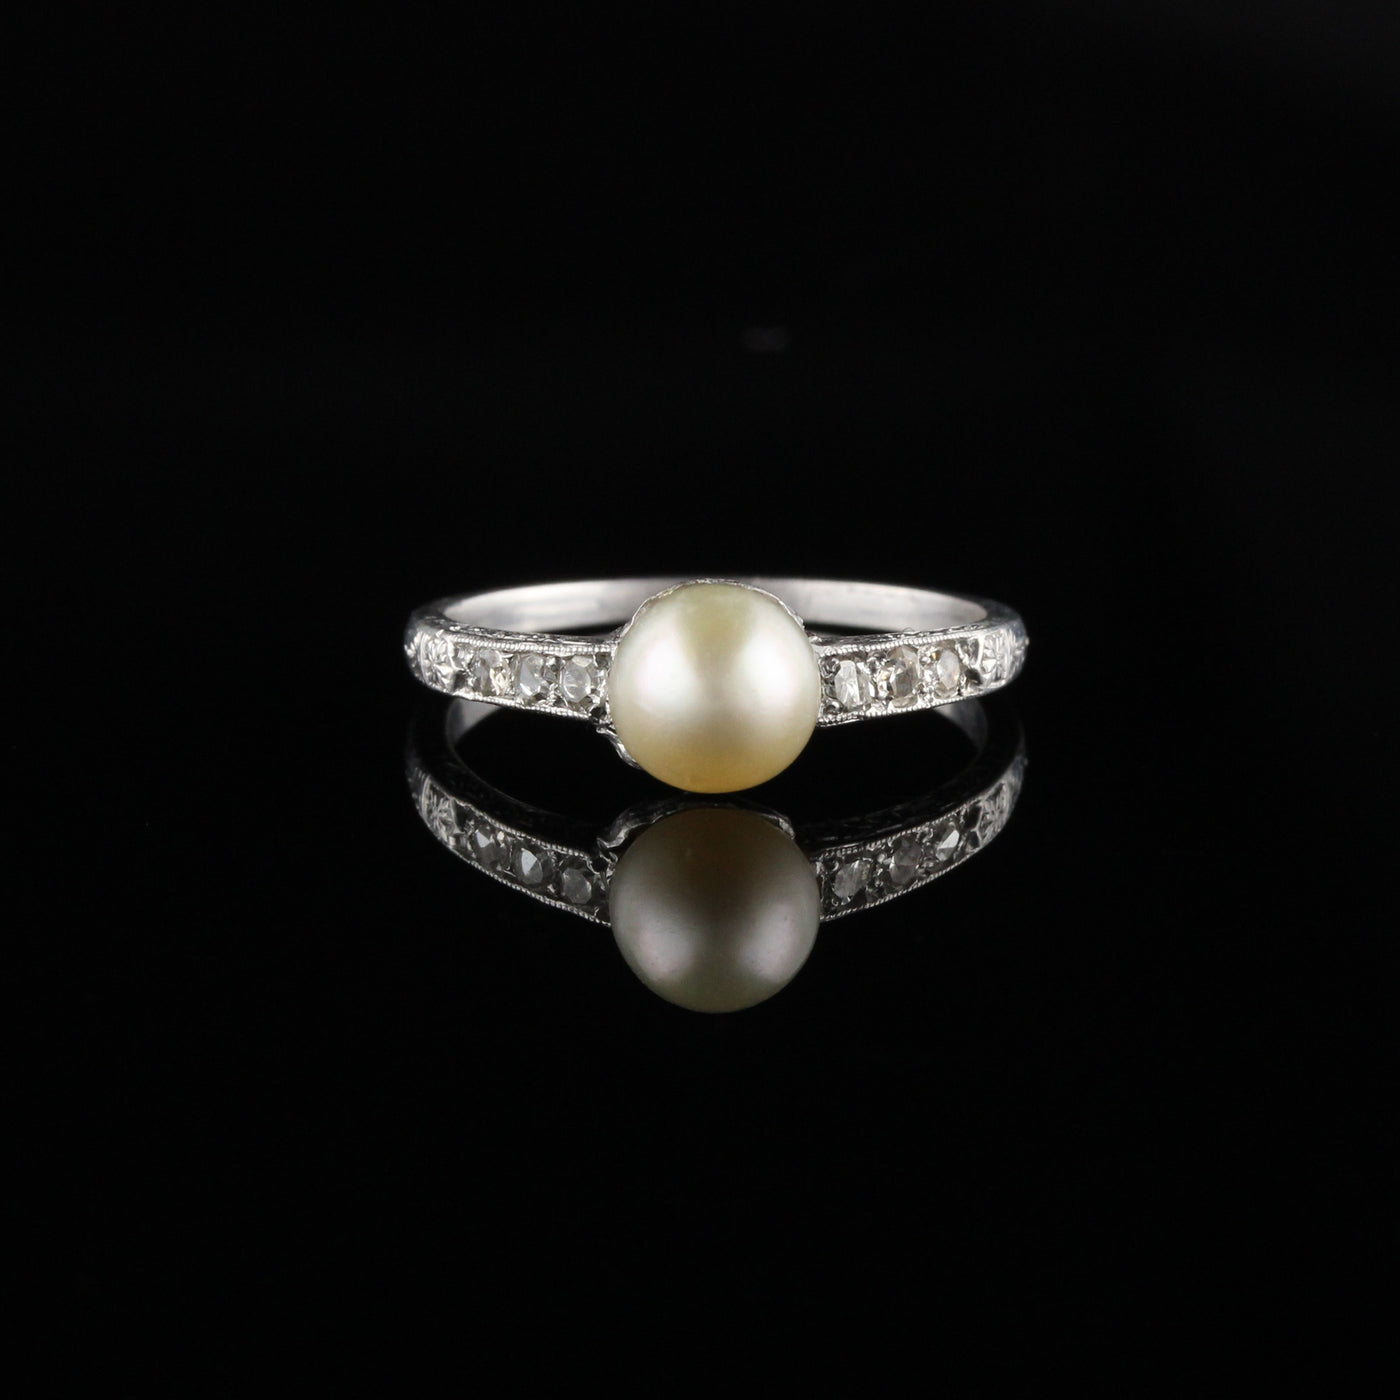 Antique Edwardian Platinum Diamond and Natural Pearl Ring